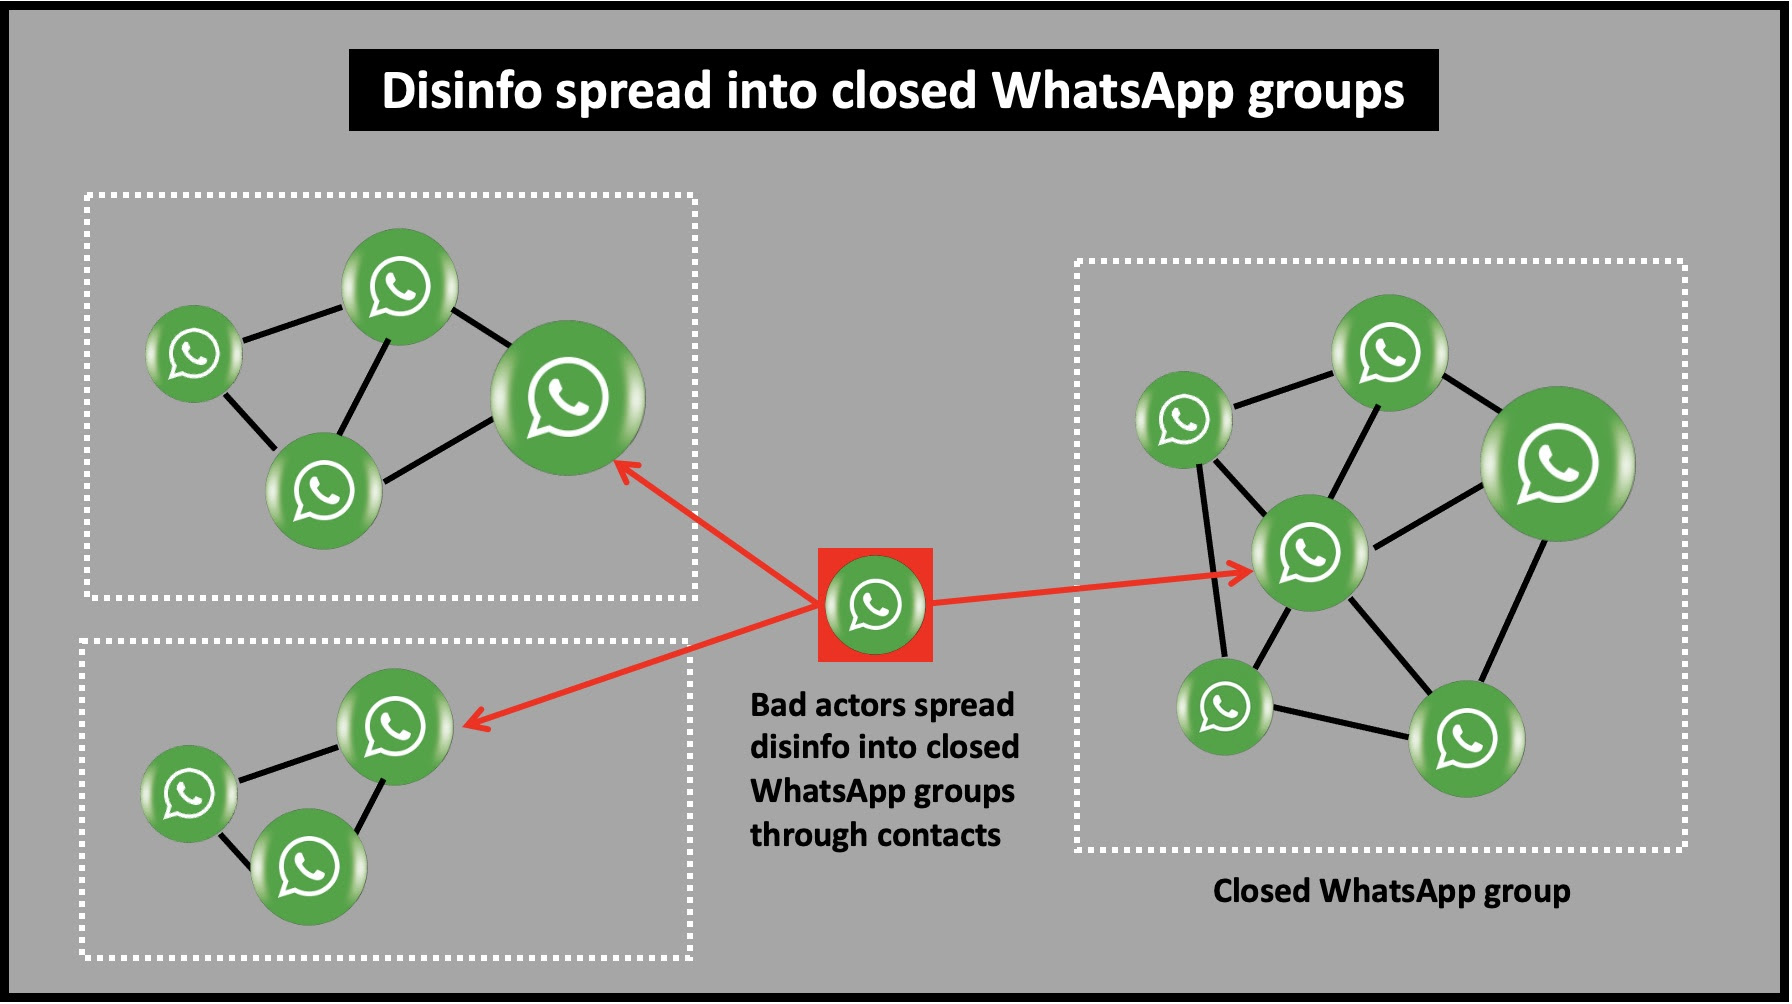 How disinfo is spread on closed WhatsApp groups